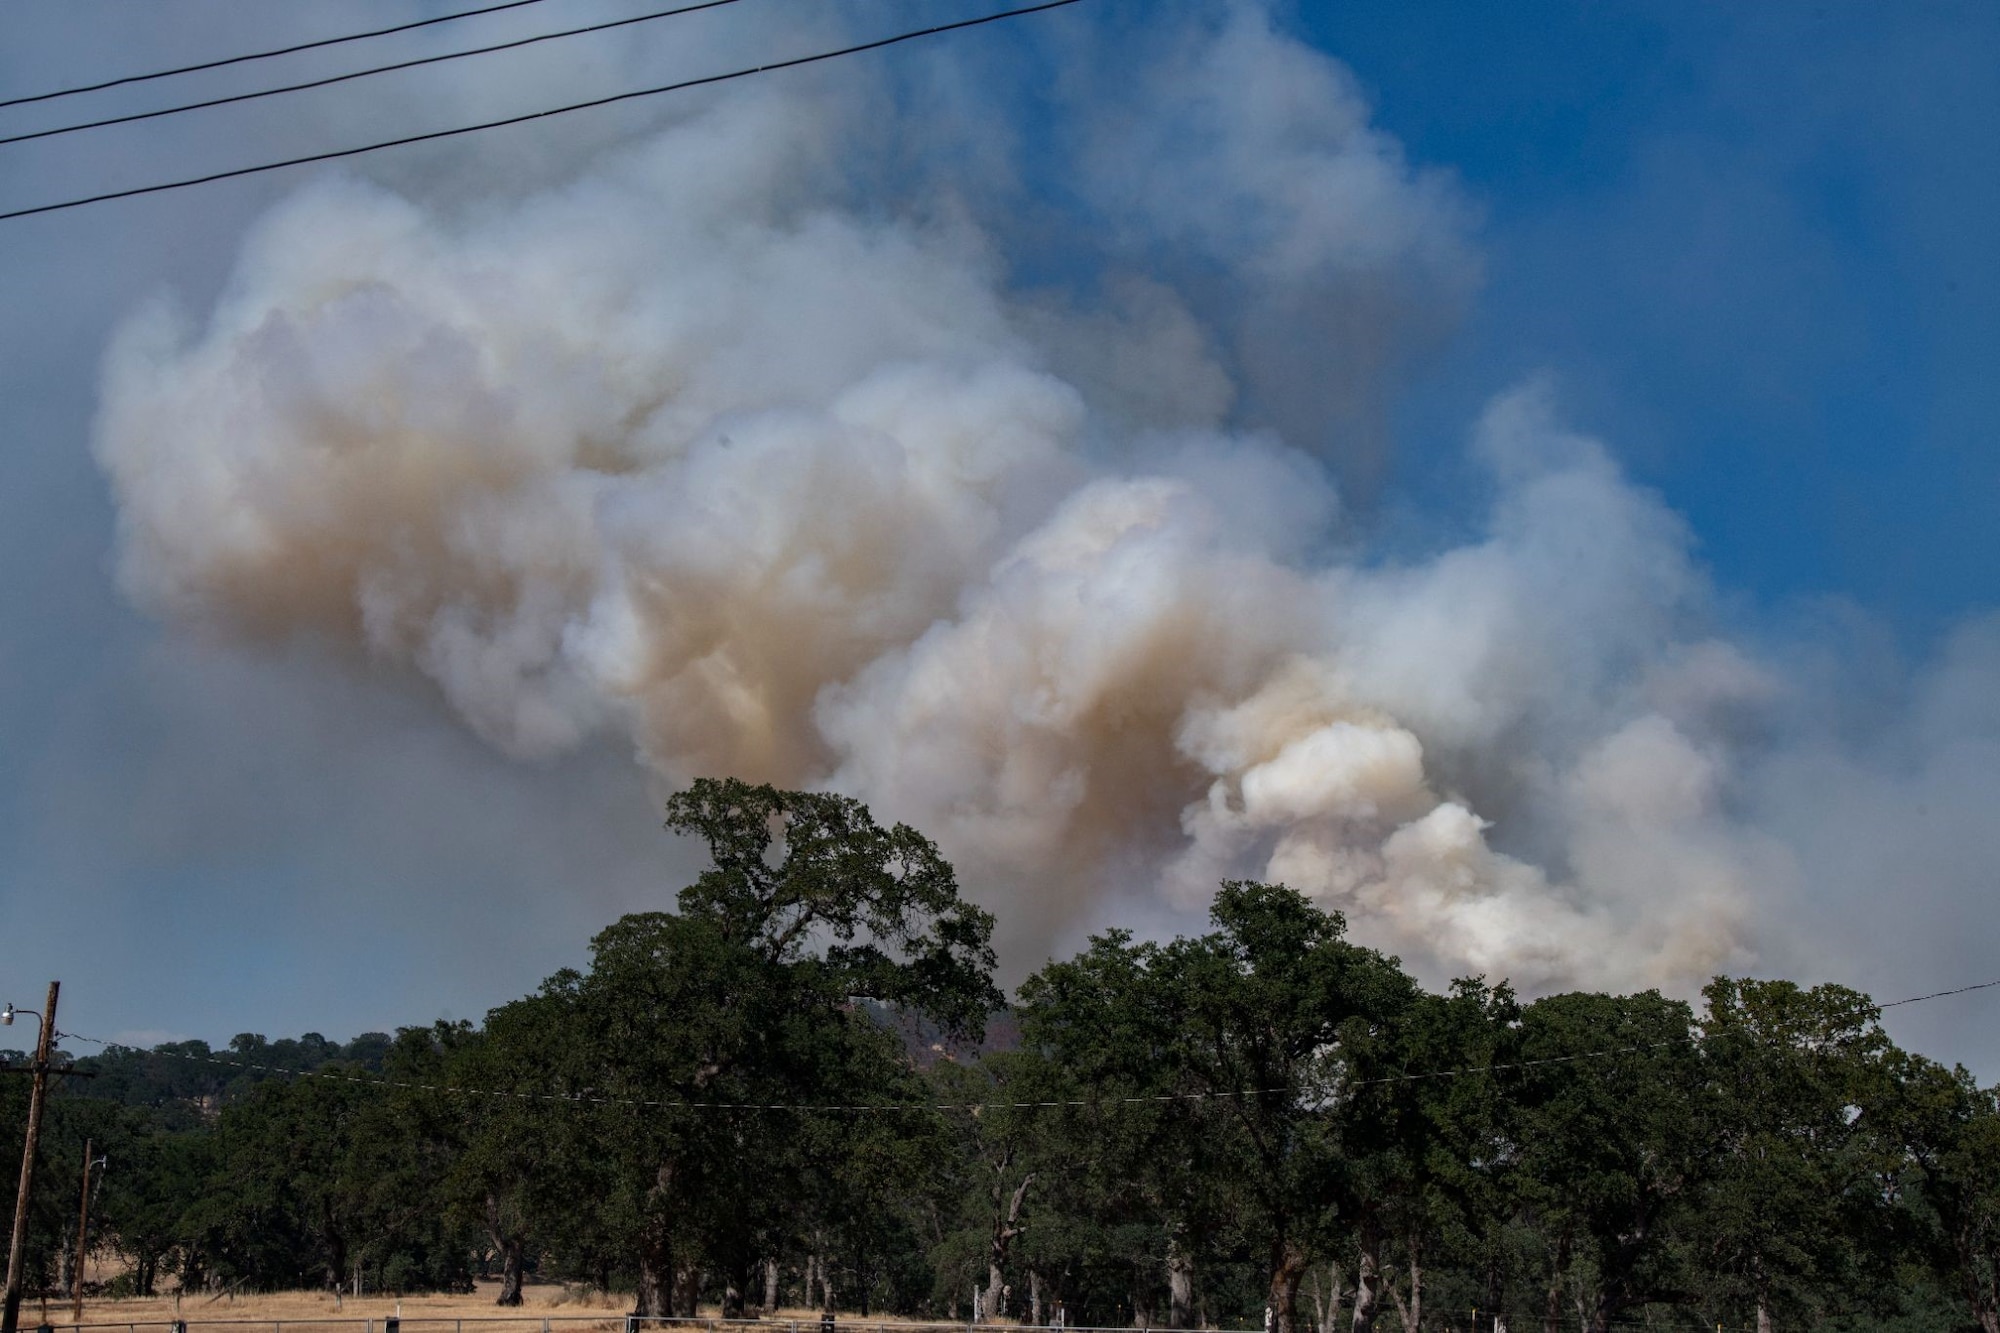 Airmen and families on Beale Air Force Base were struck with a real-world notification, directing residents to evacuate due to an approaching wildfire.